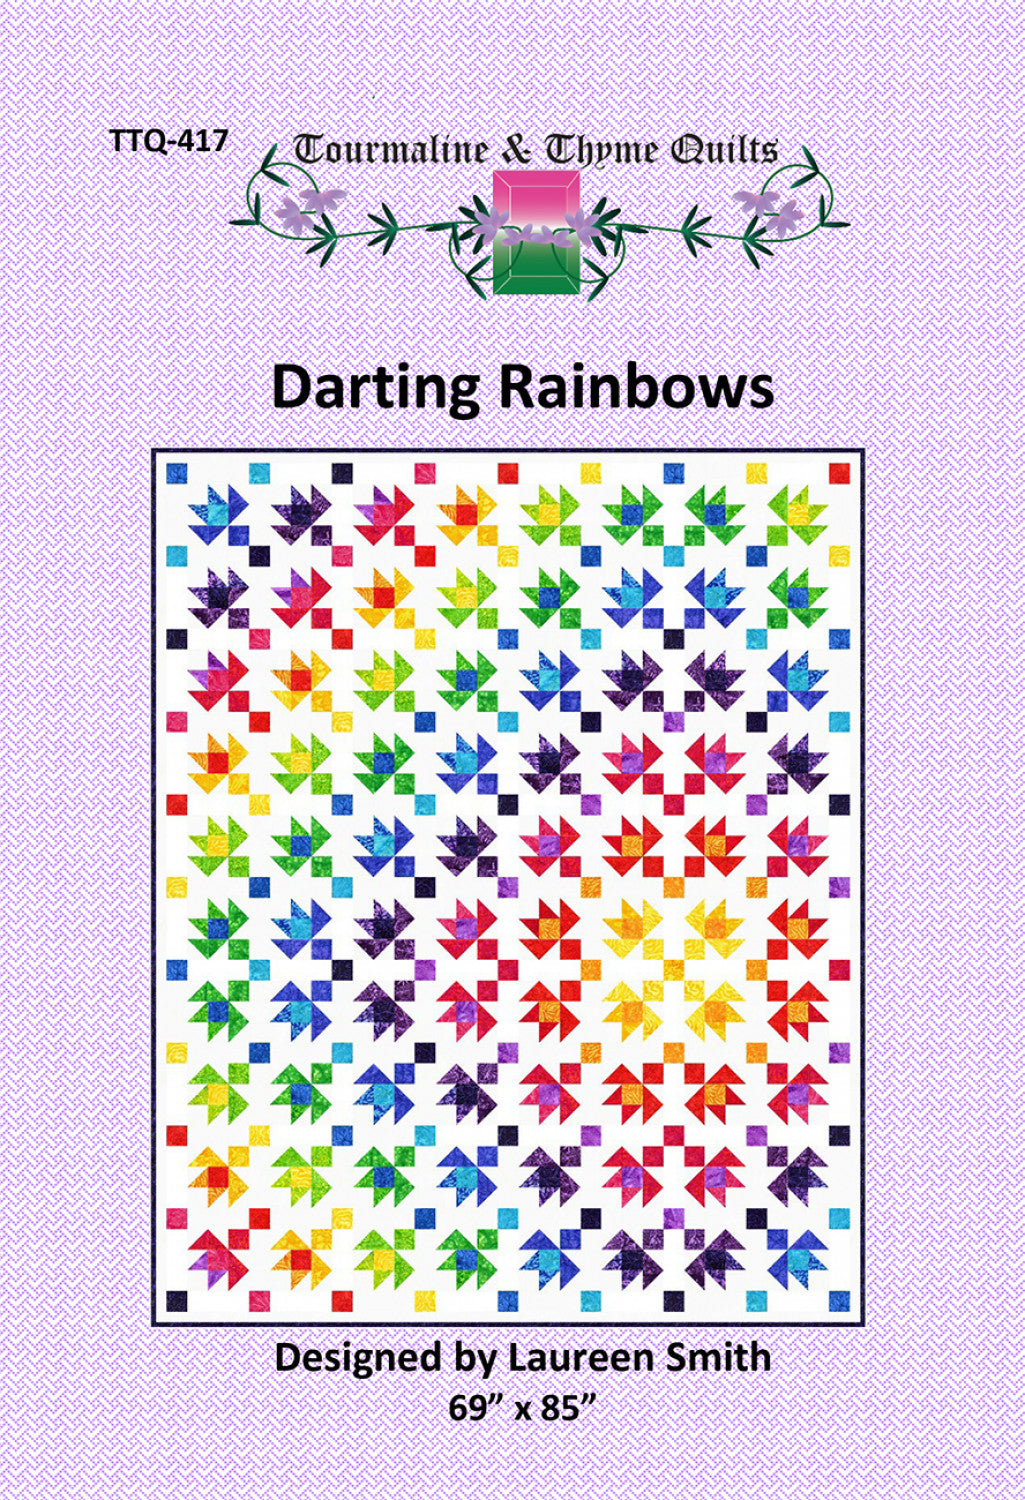 Darting Rainbows Quilt Pattern by Tourmaline & Thyme Quilts